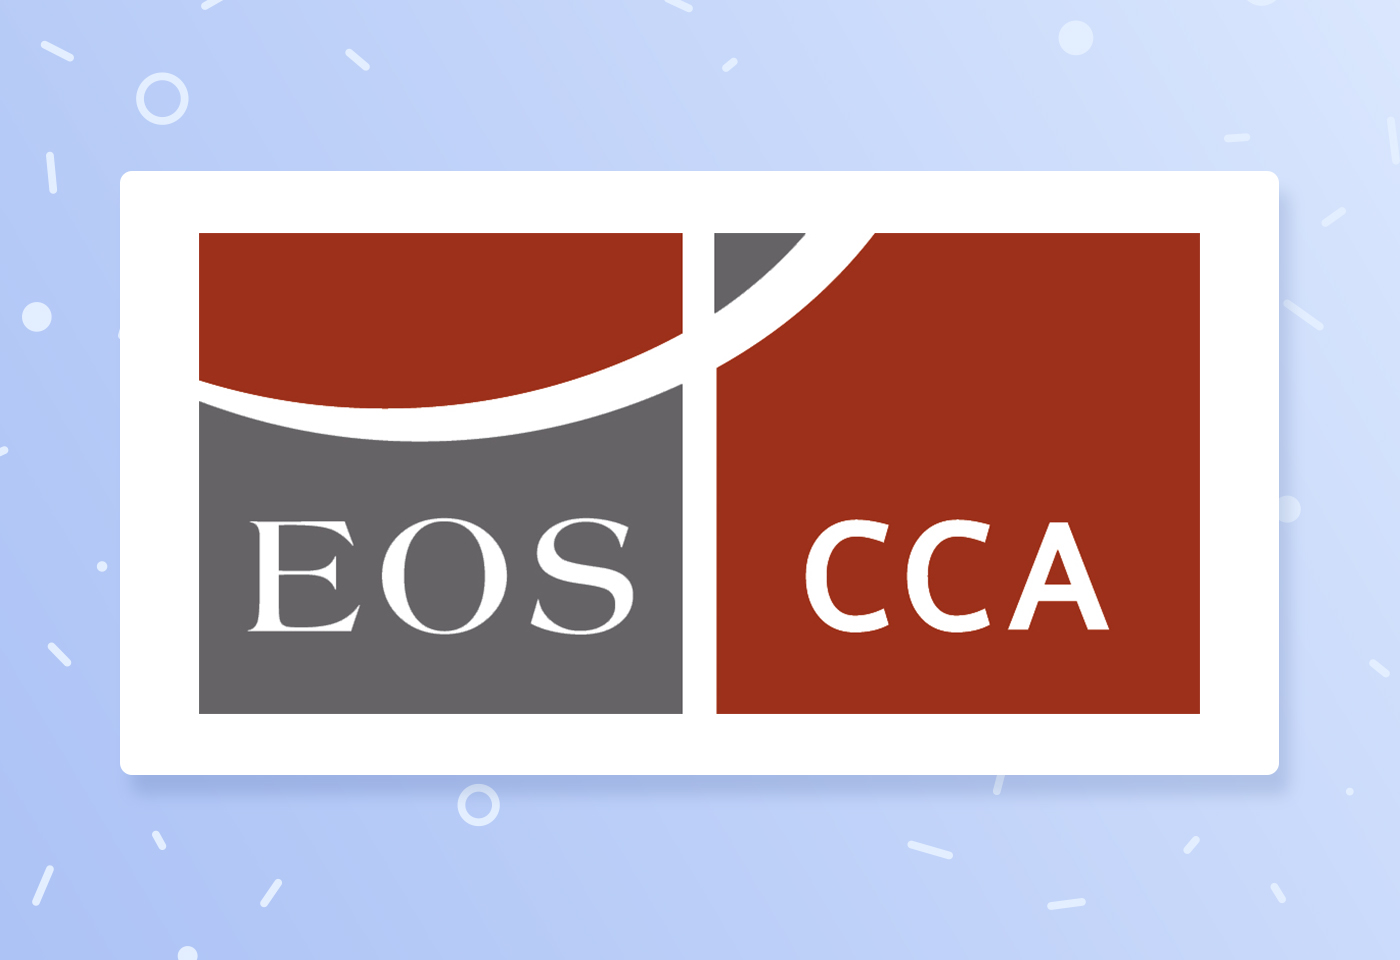 EOS CCA. What Is It?